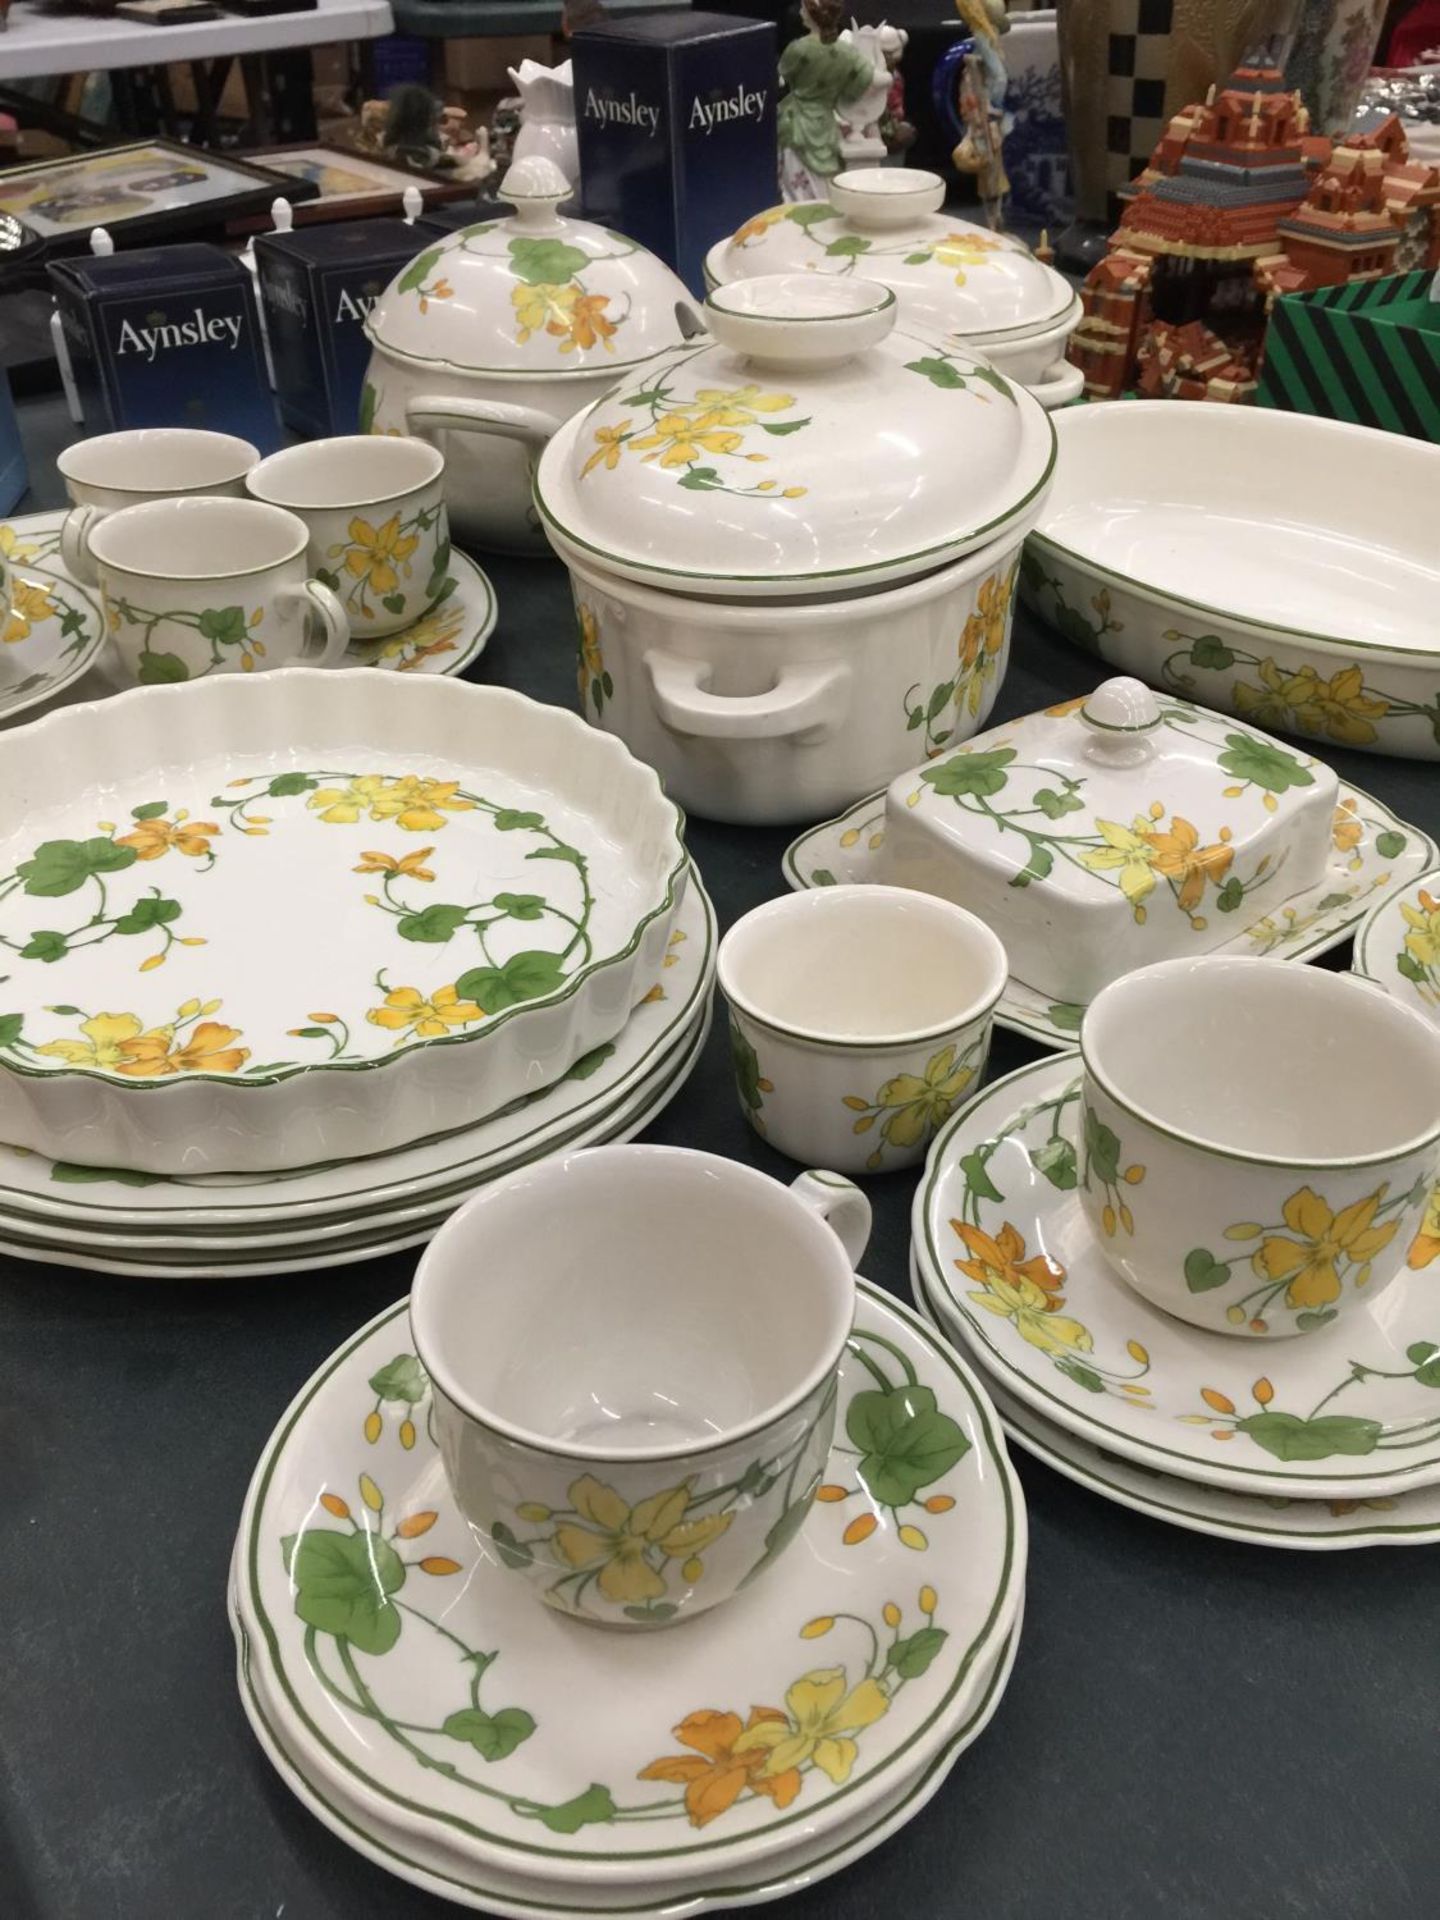 A LARGE QUANTITY OF VILLEROY AND BOCH 'GERANIUM' DINNERWARE TO INCLUDE PLATES, CUPS, SAUCERS, - Image 3 of 8